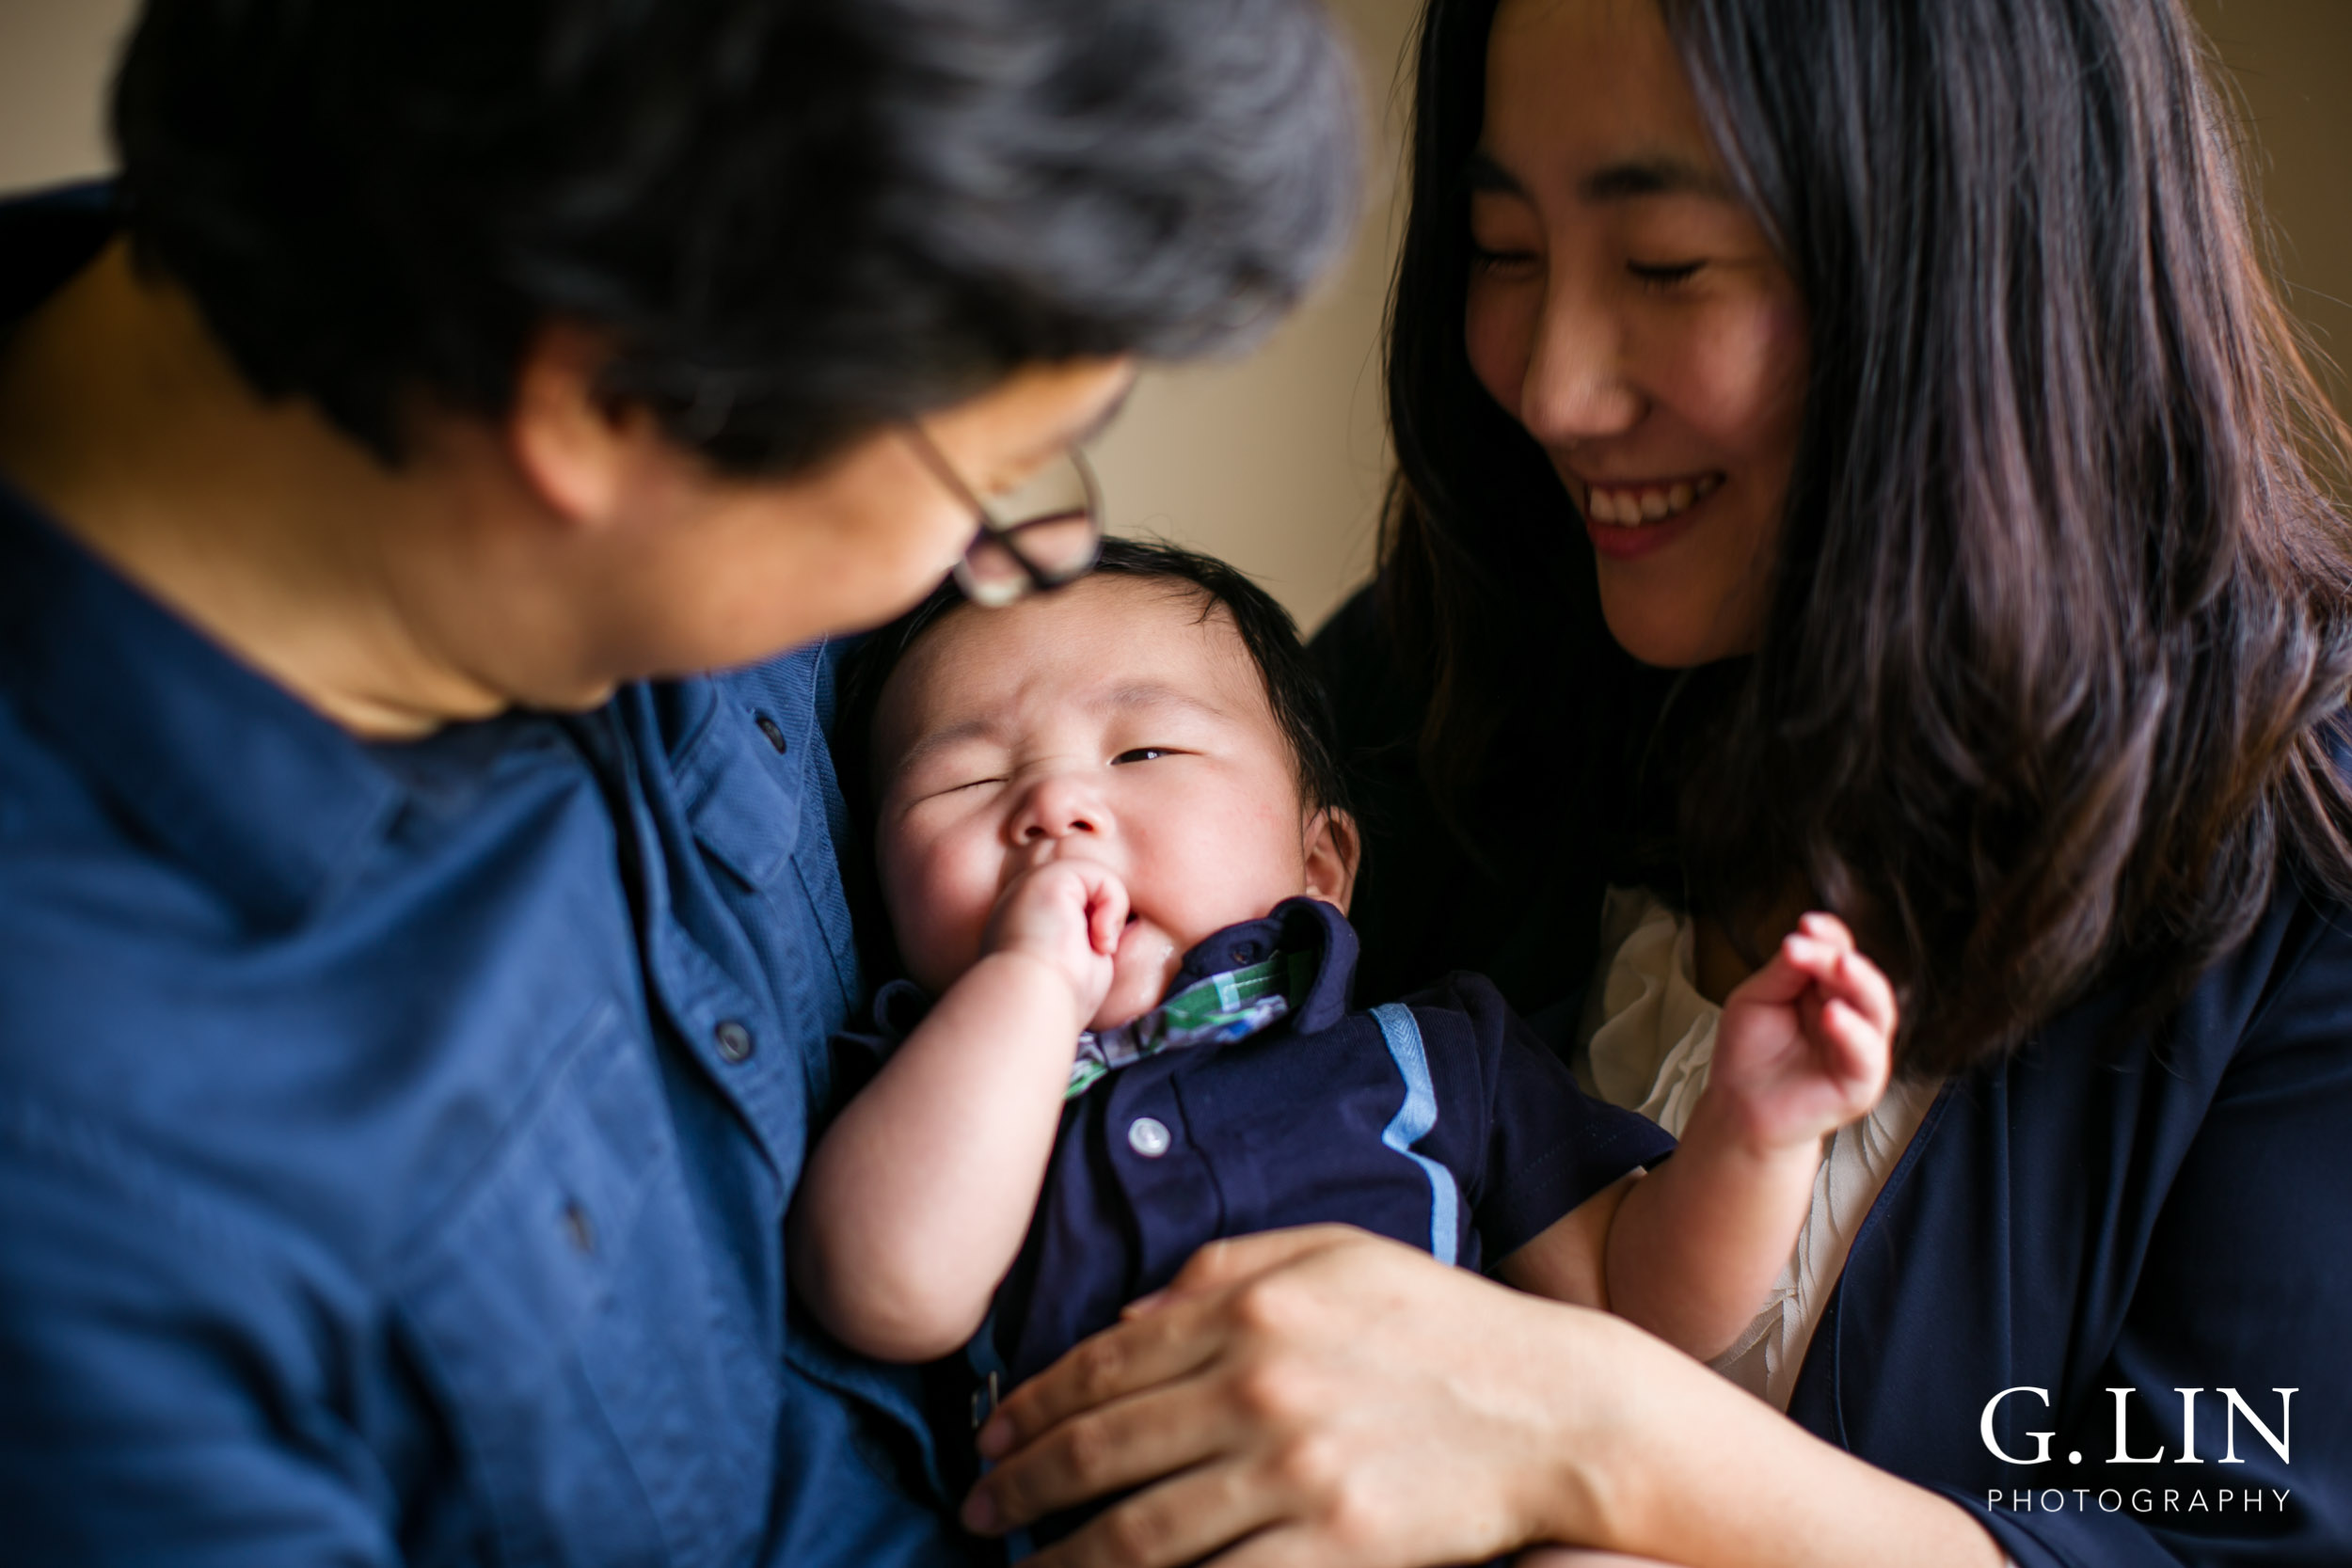 Durham Family Photographer | G. Lin Photography | Parents holding baby at home in bedroom